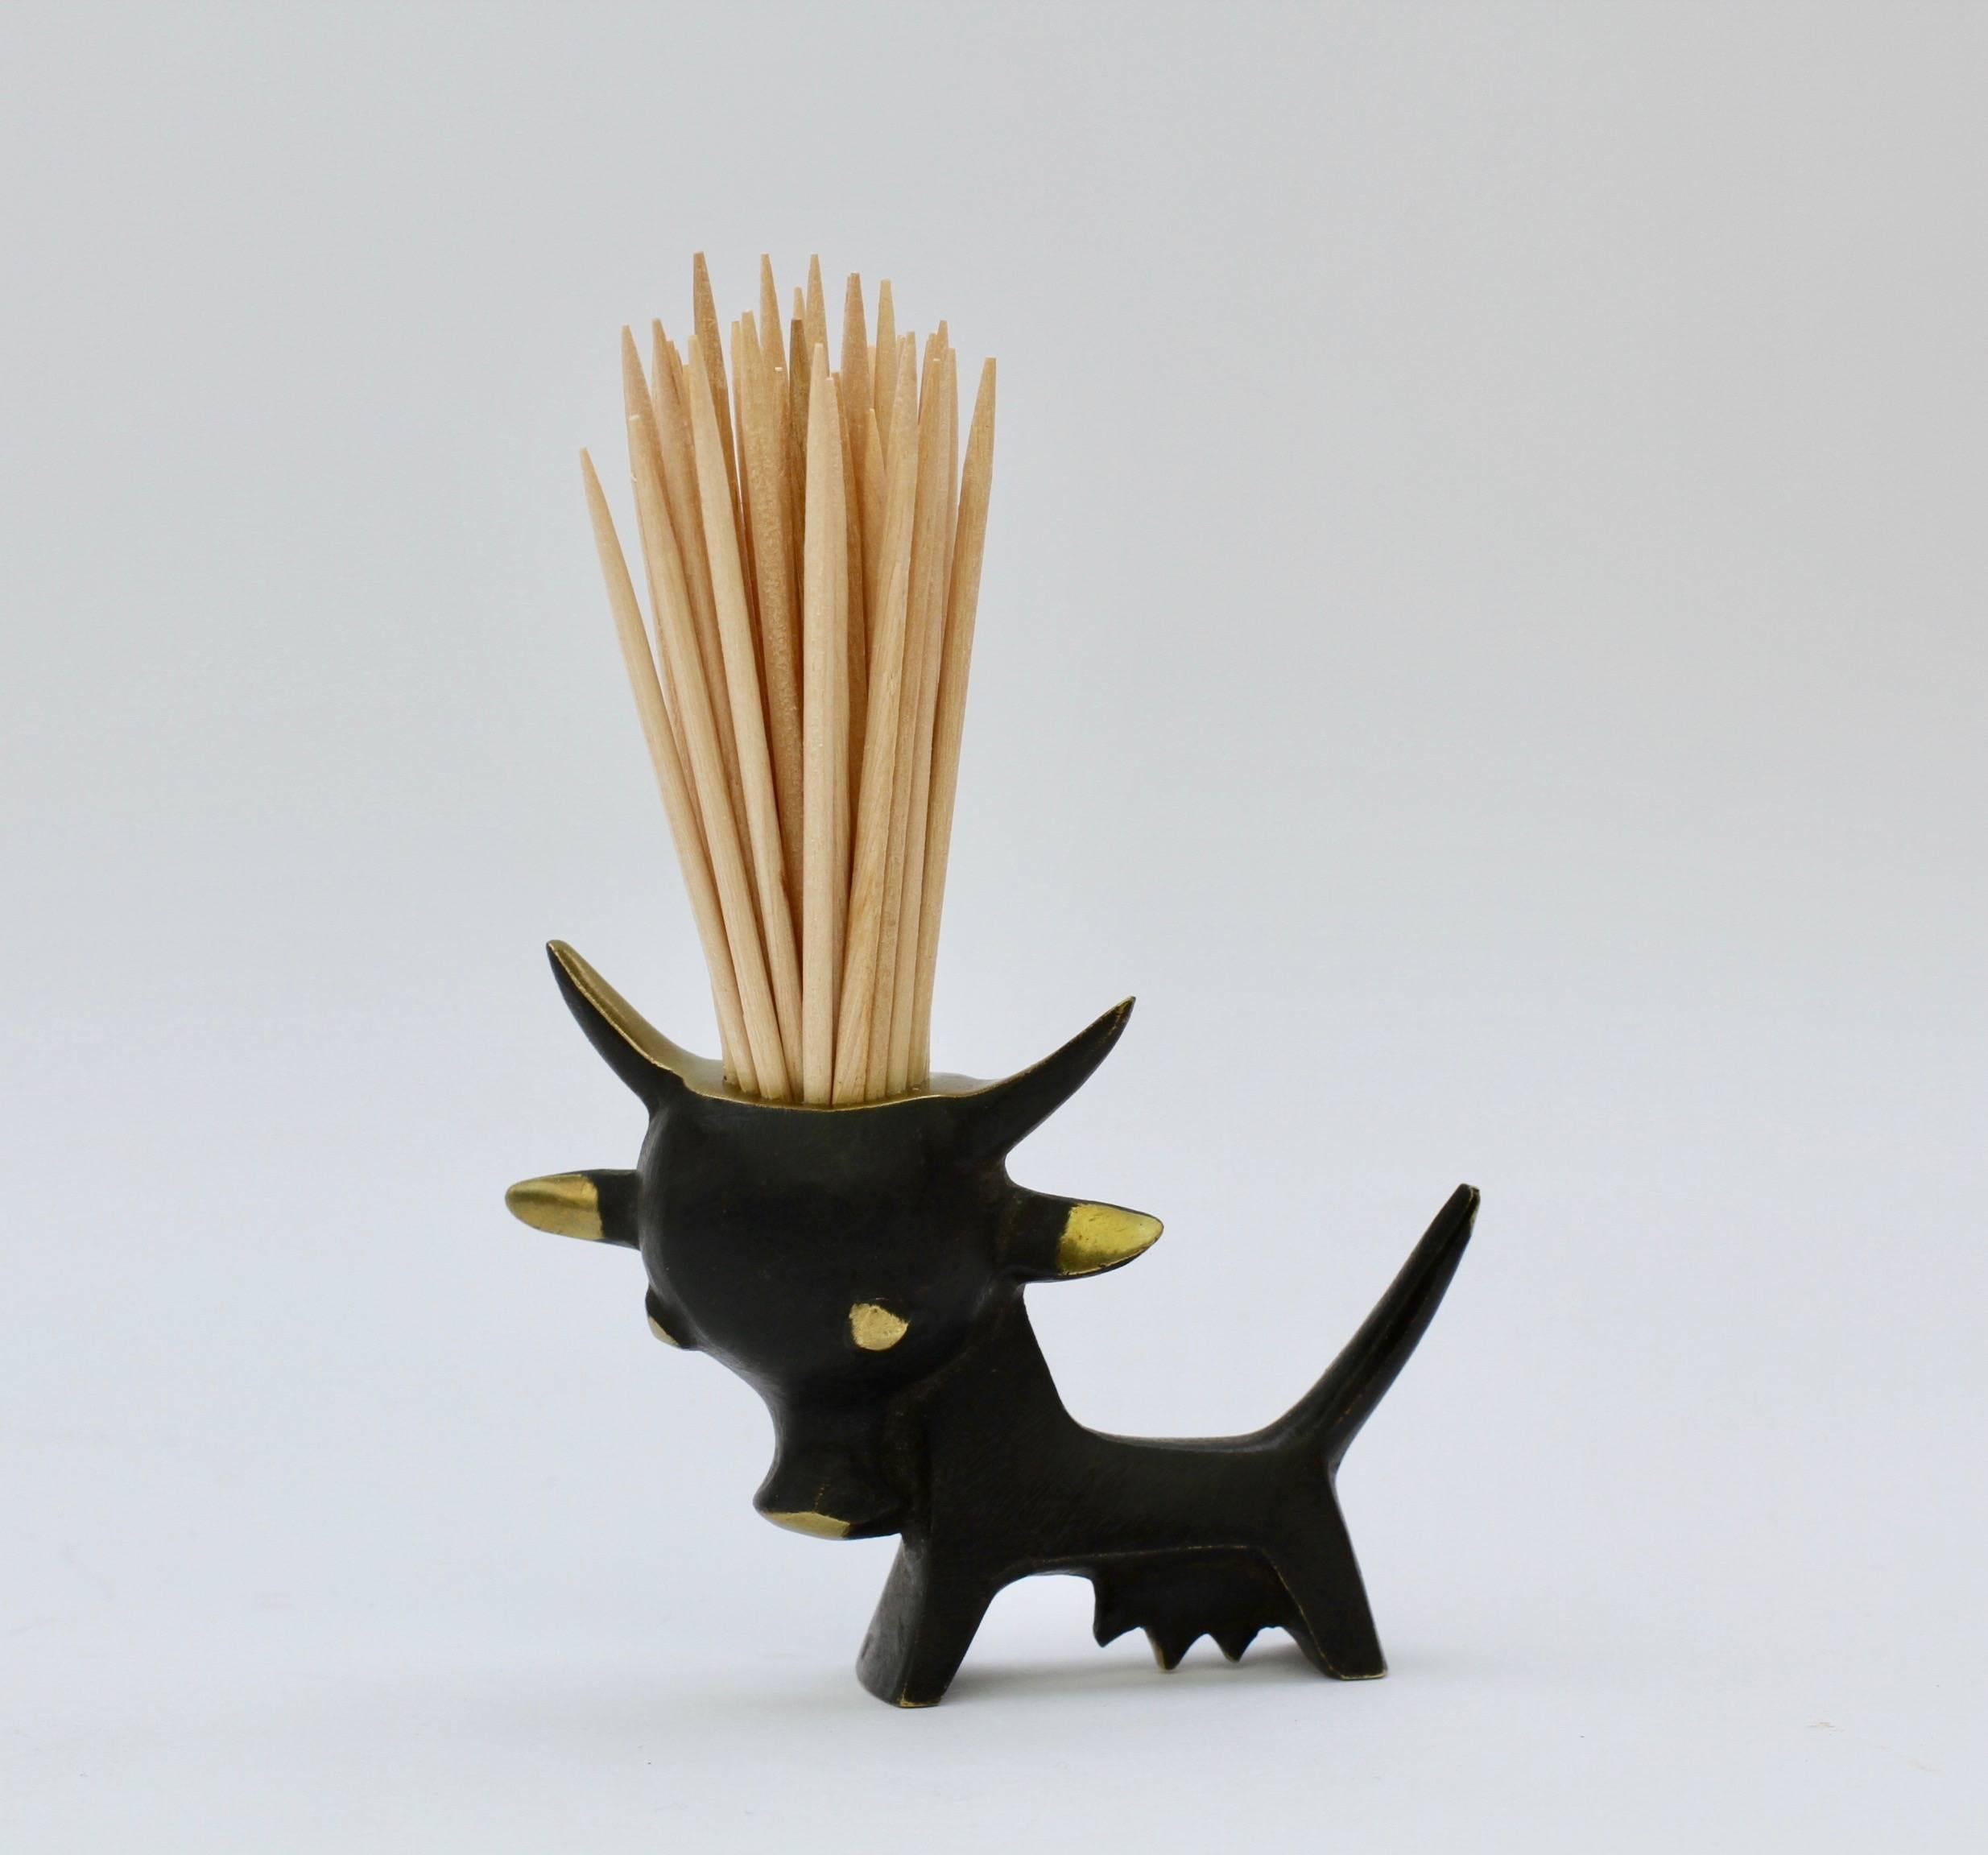 A Walter Bosse toothpick holder in the form of a cow or bull.

Walter Bosse's whimsical and playful designs have one the hearts of many a design fan/collector as they are perfectly practical and joyfully jest full. Bring back your inner child and